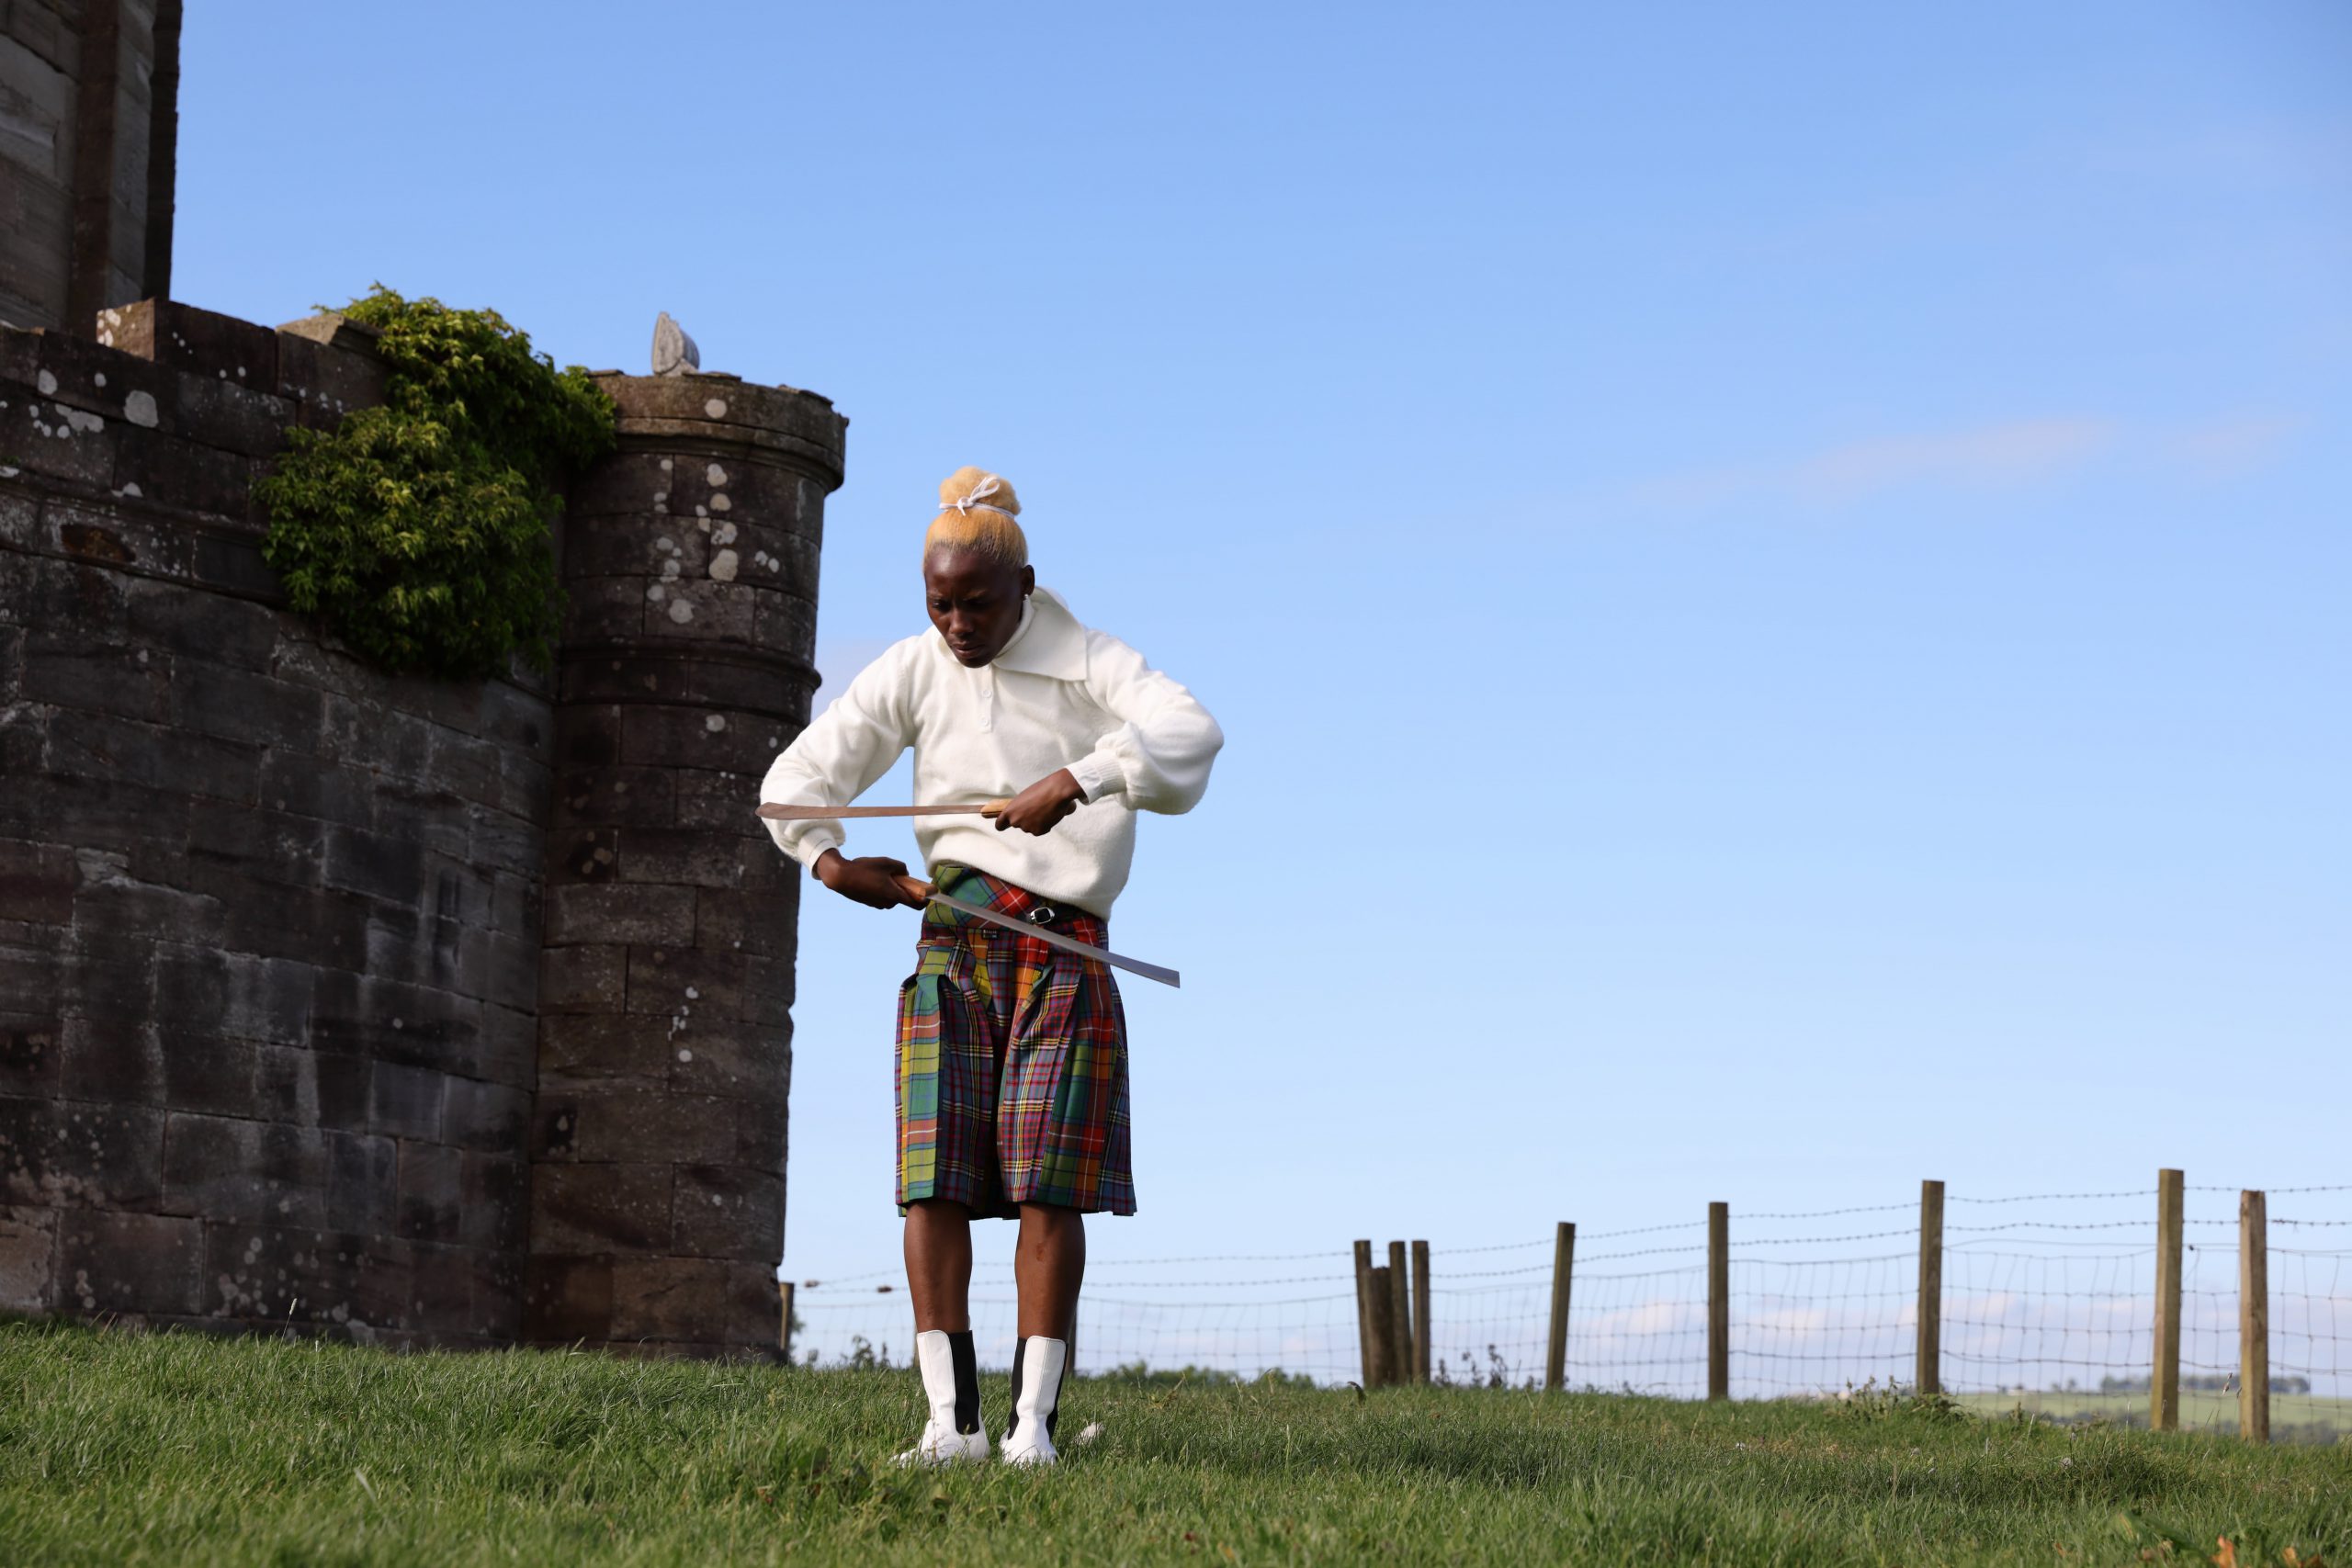 An image still from the film Lagareh of a Black dancer wearing a kilt and a white shirt. The dancer holds two long knives in her hands and stands on green grass with a blue sky behind her and a castle-like building to her left.